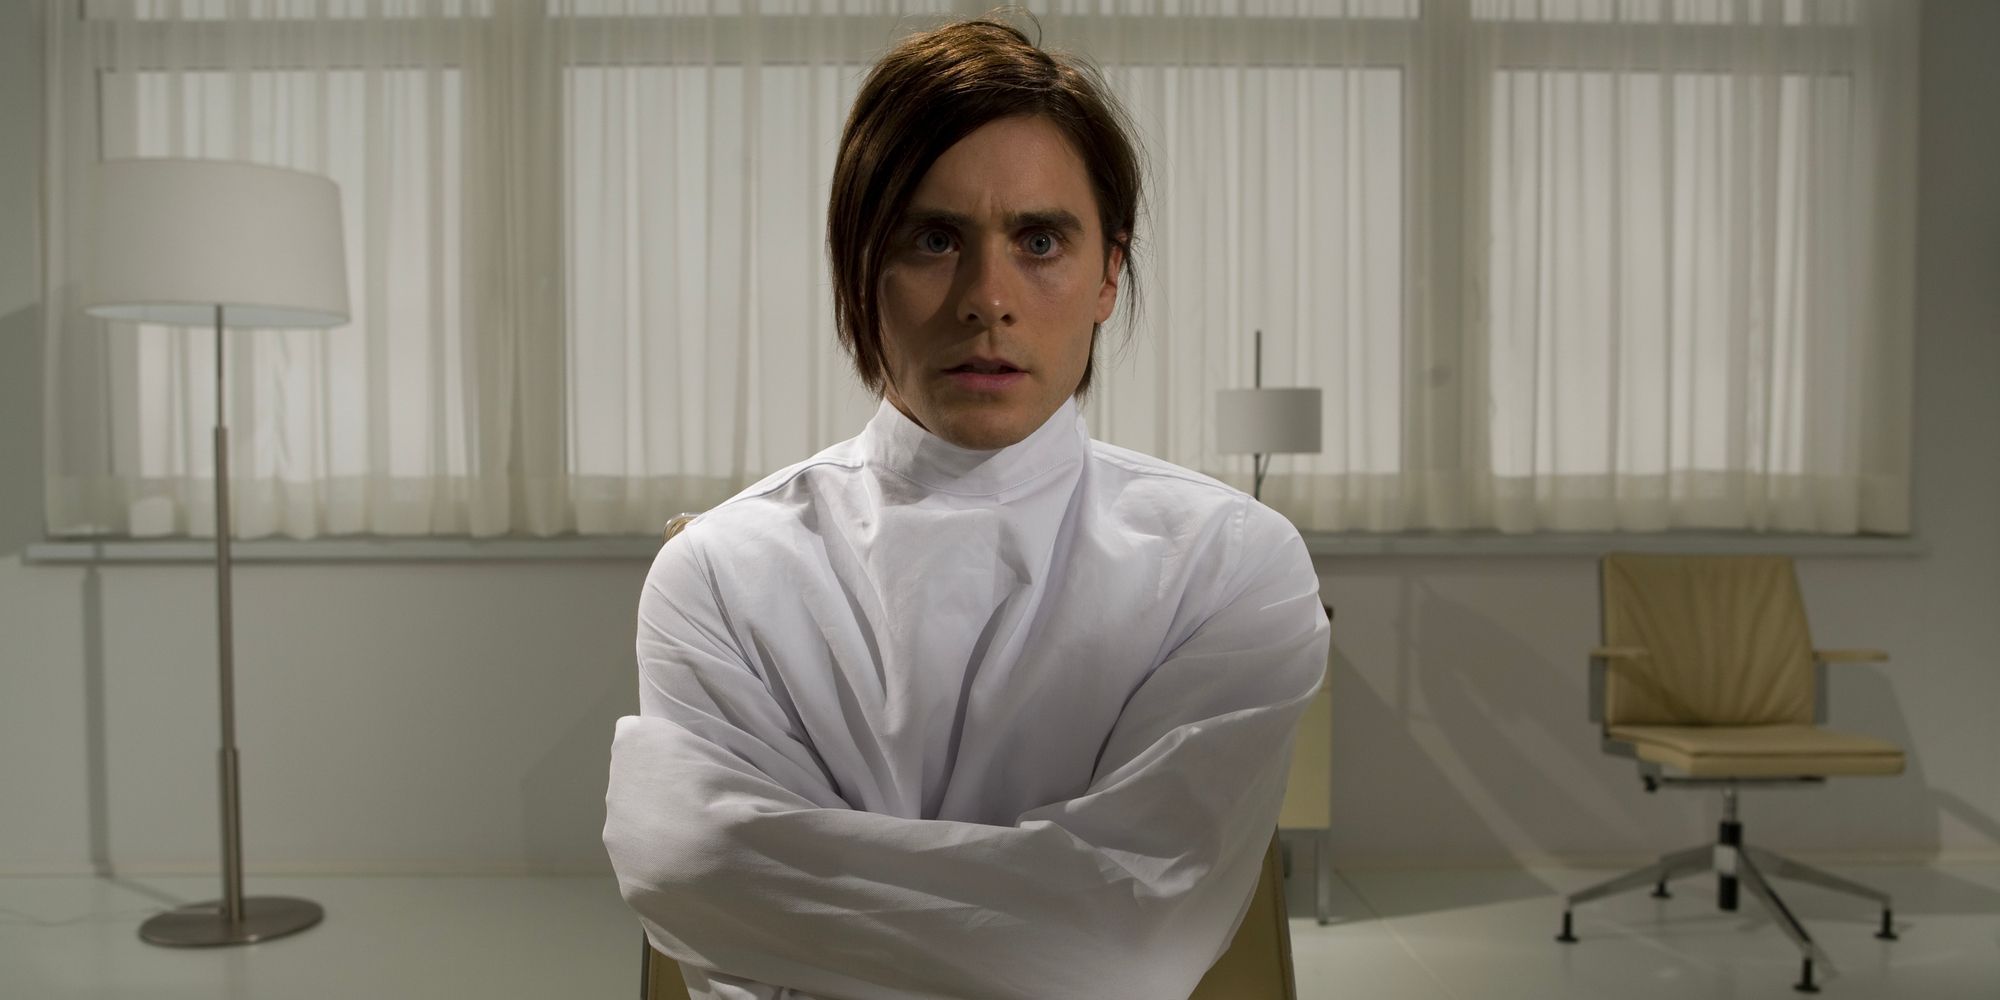 A young man, Nemo Nobody, sits in a straight jacket in a sterile, white room.